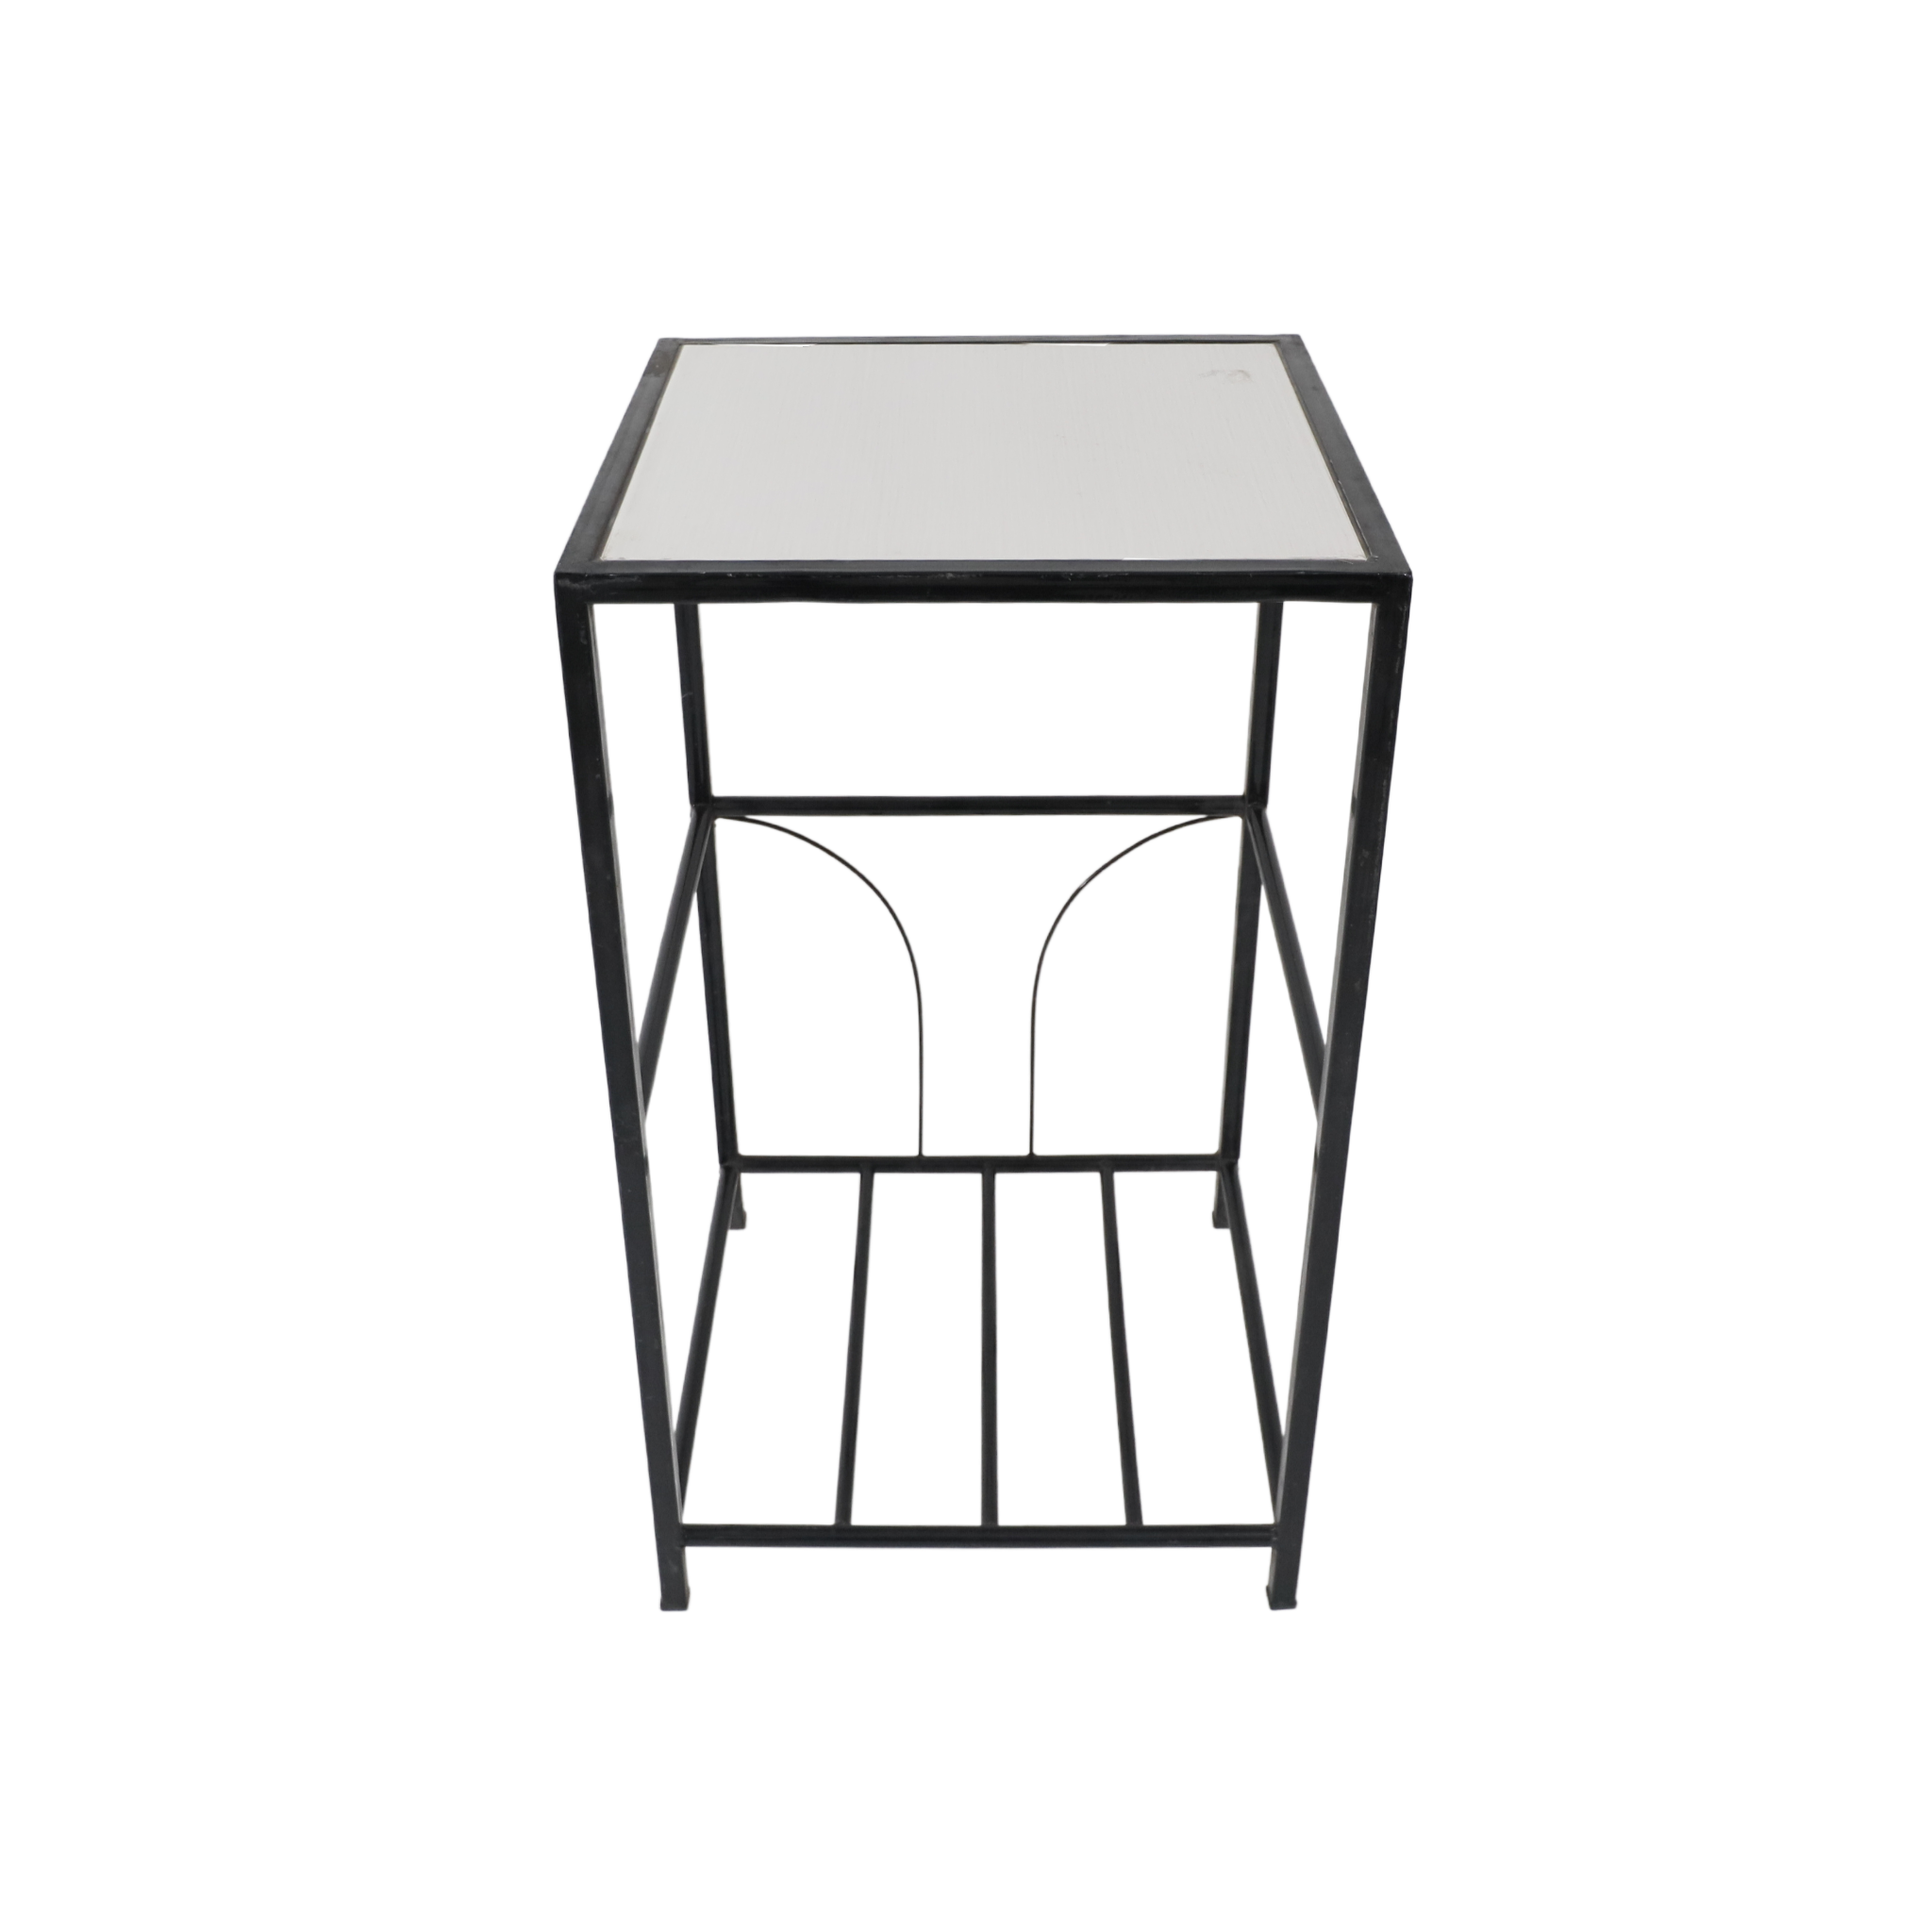 SION Single Stove Stand AF Home